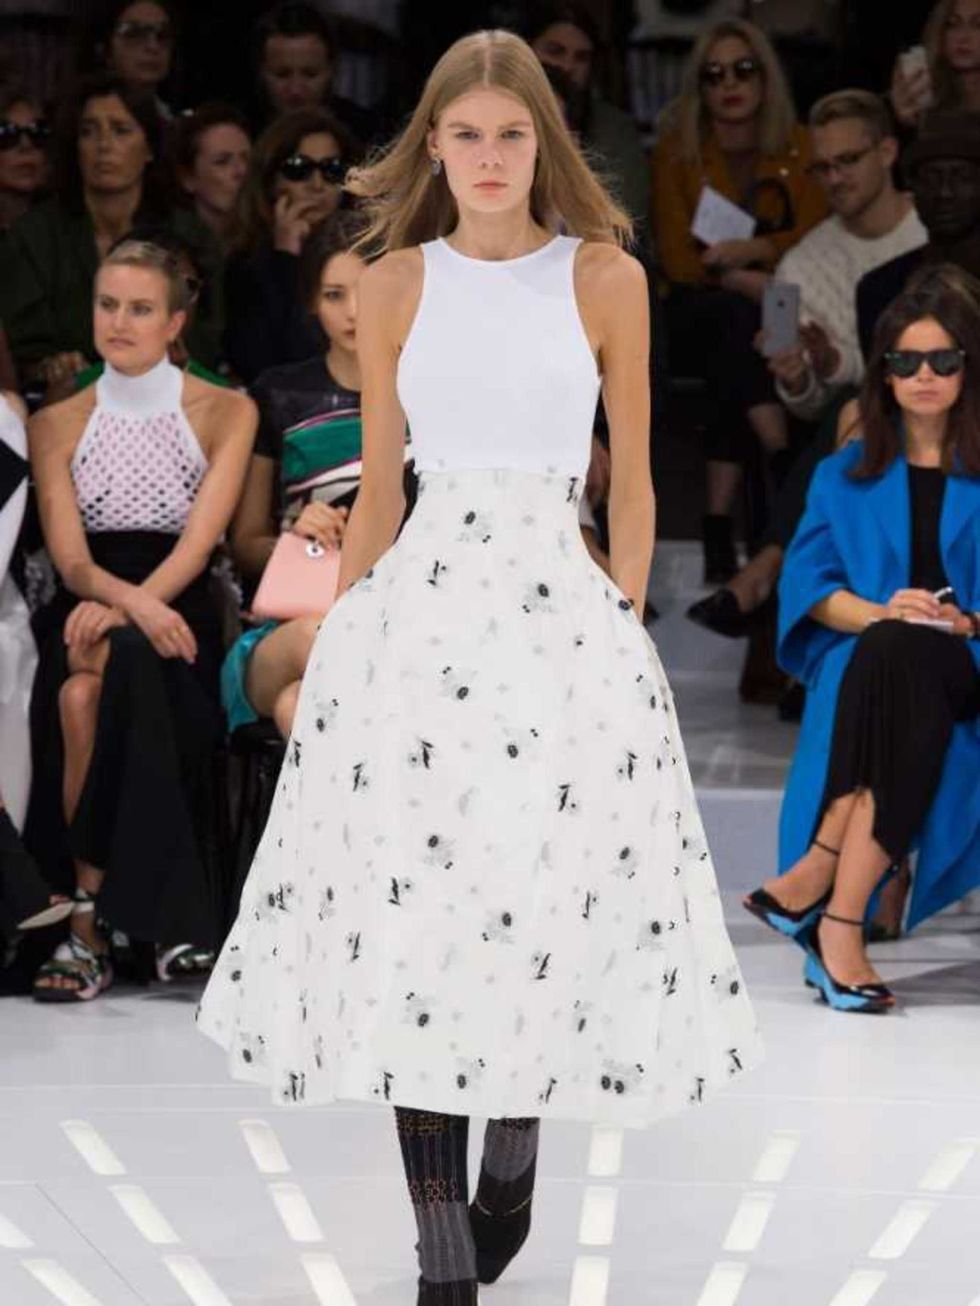 <p>Another stunning <a href="http://www.elleuk.com/catwalk/christian-dior/spring-summer-2015">Dior</a> dress to add to <a href="http://www.elleuk.com/fashion/celebrity-style/jennifer-lawrence#image=1">Jennifer Lawrence</a>'s collection. </p>